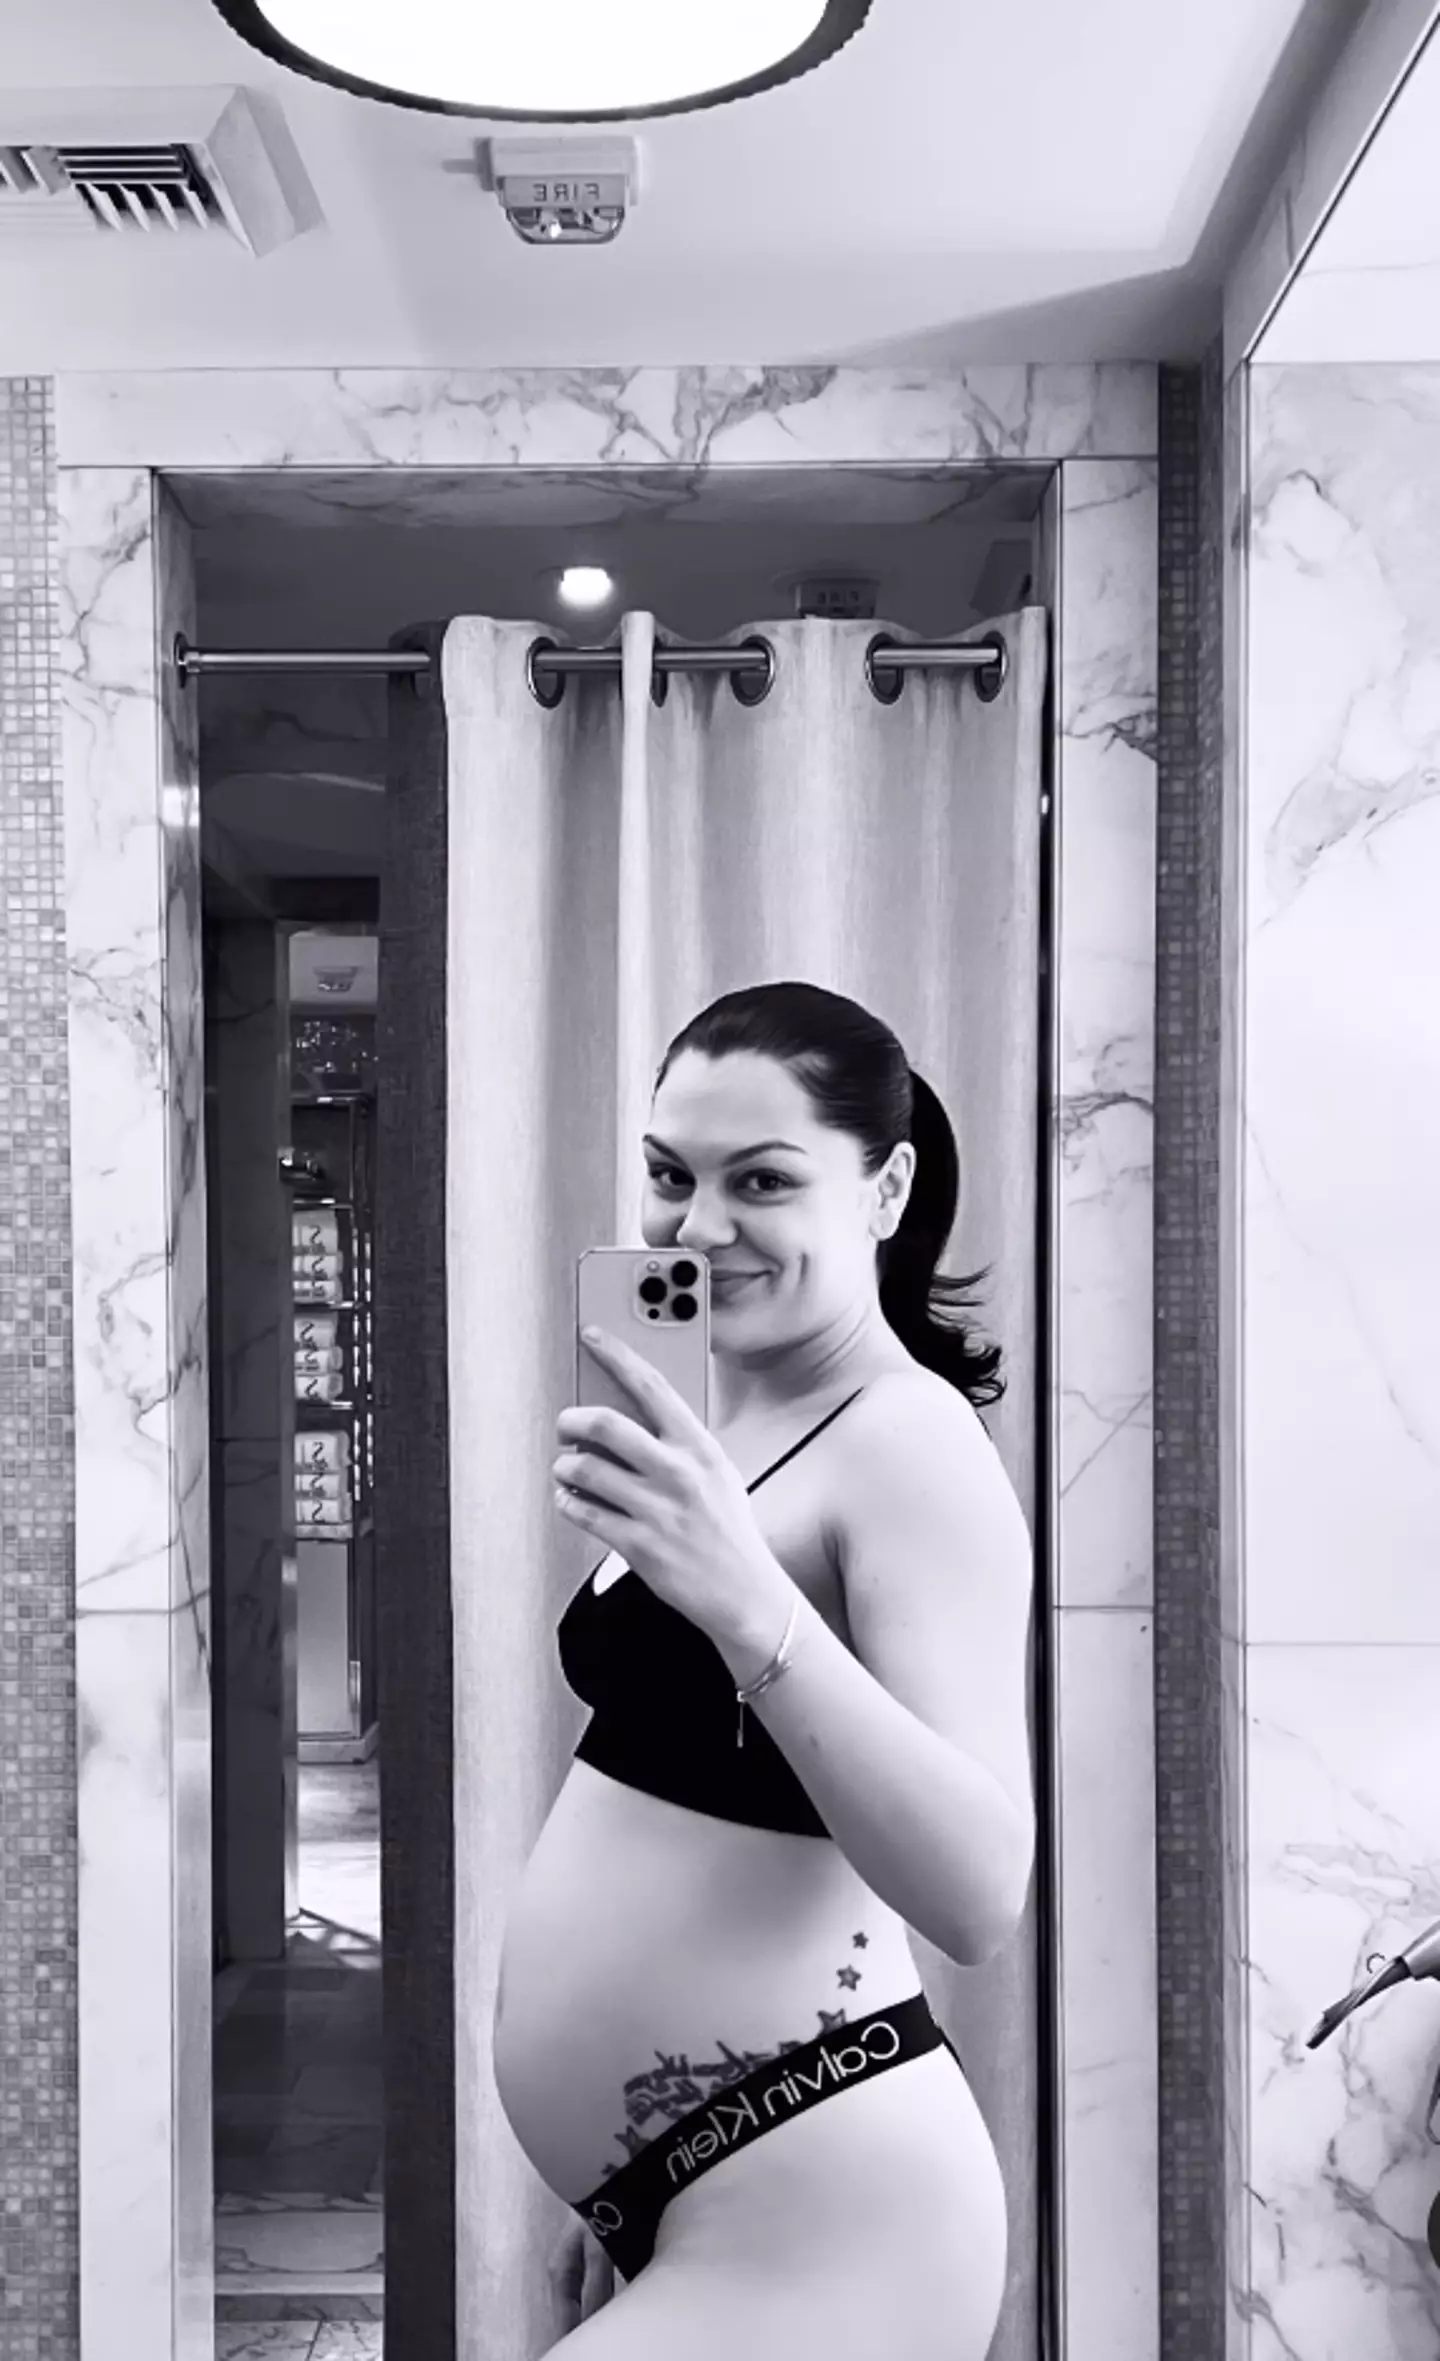 Jessie J surprised fans in January with a beautiful pregnancy announcement.